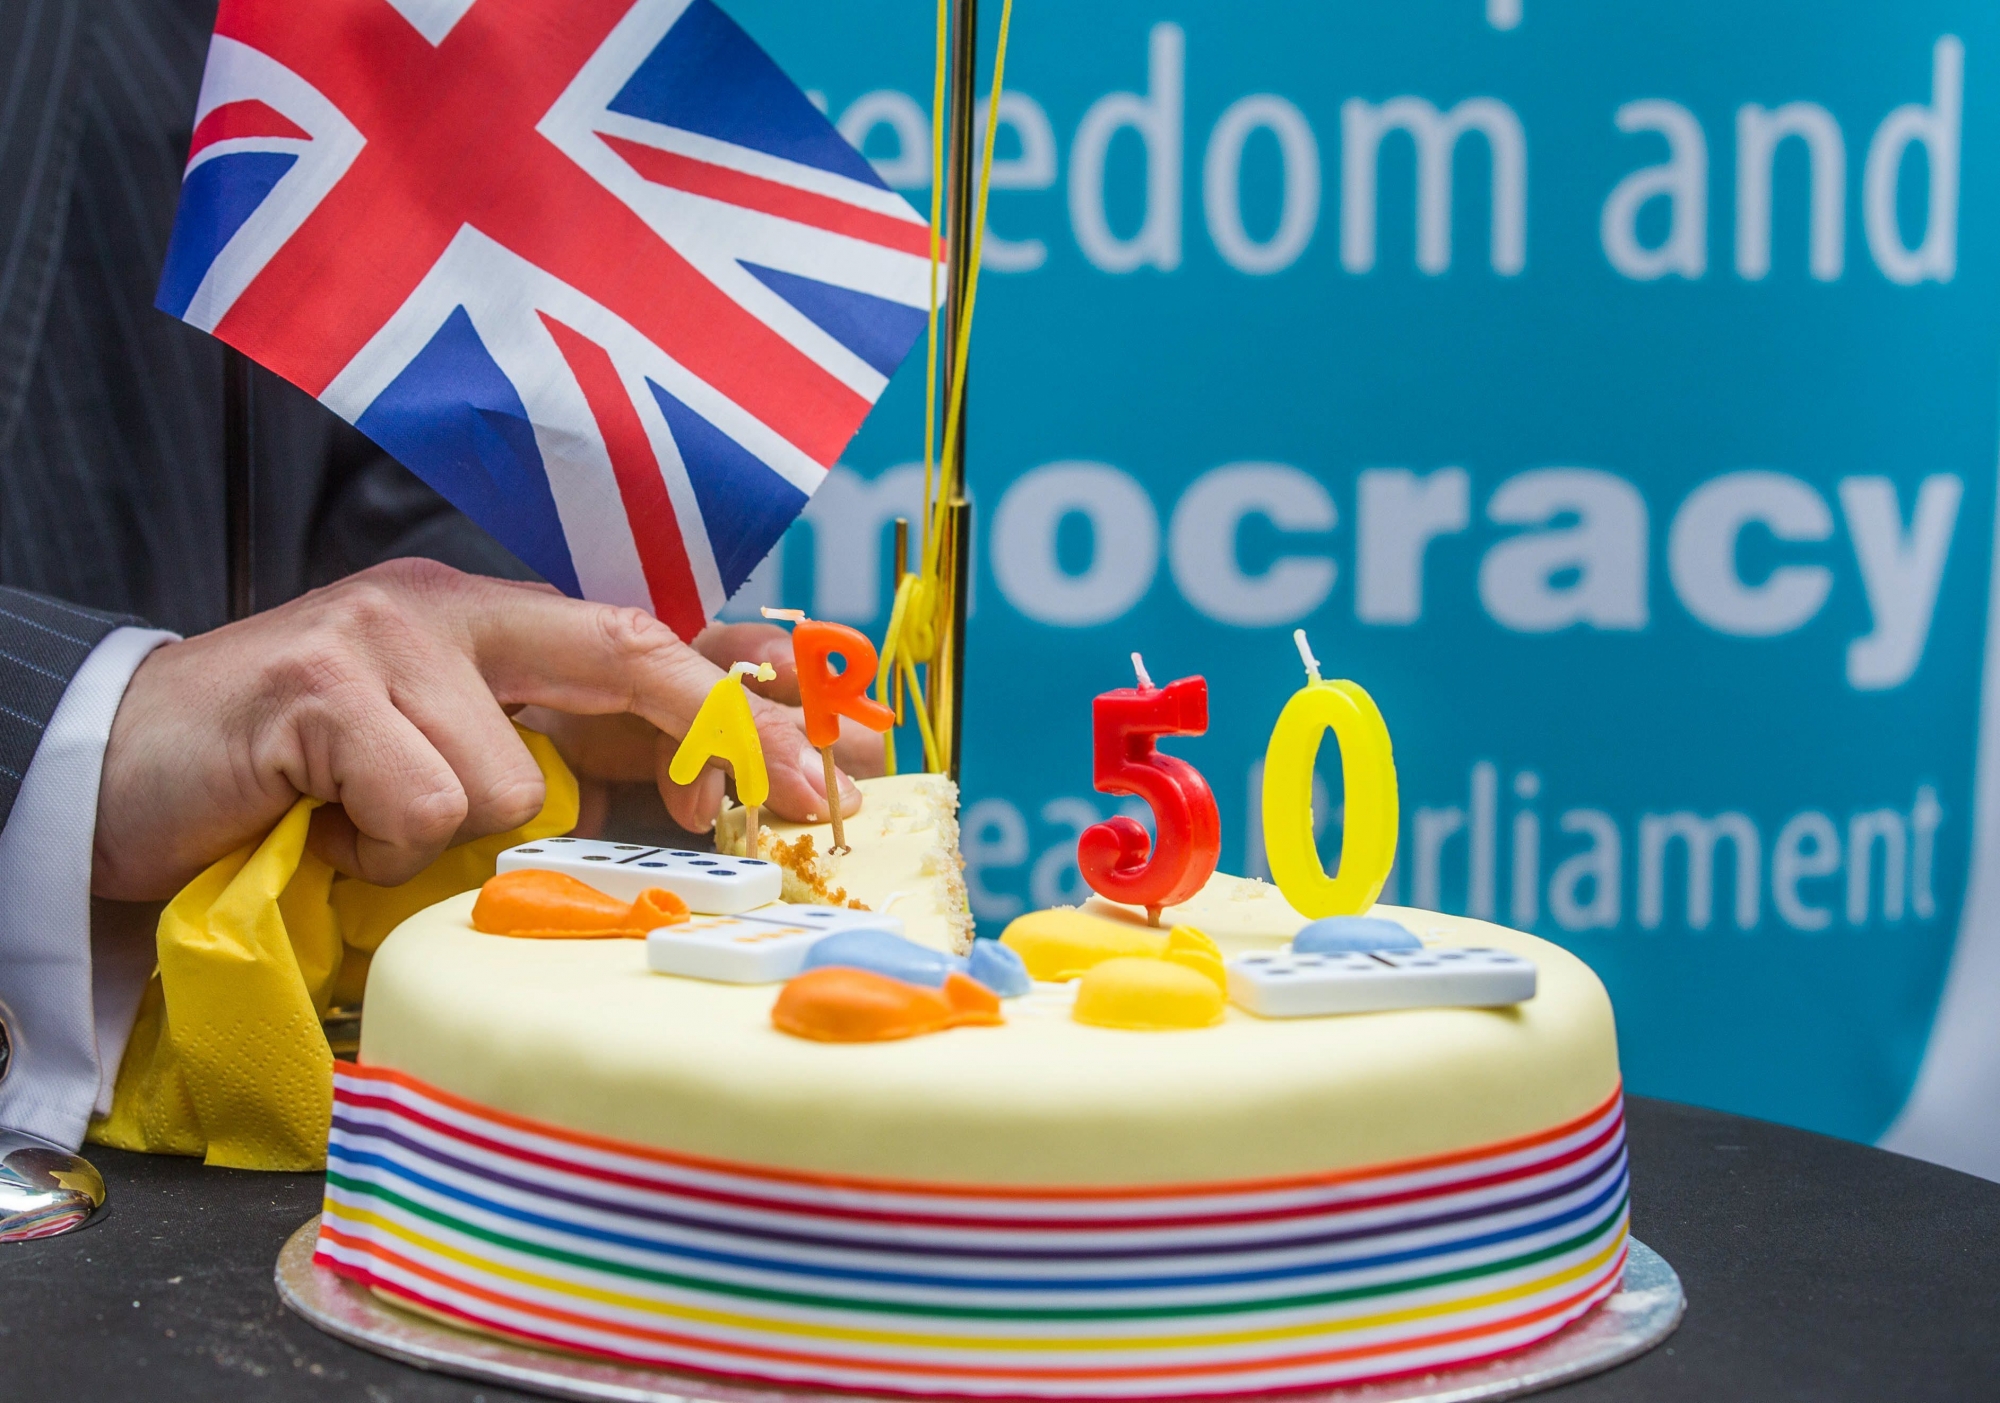 epa05877078 A member of Britain's UK Independence Party (UKIP) takes a slice of cake to celebrate the official triggering of Article 50 of the Lisbon Treaty, dubbed 'Brexit', at the Old Hack Pub in front of the EU Commission in Brussels, Belgium, 29 March 2017. The British ambassador to the EU, Sir Tim Barrow, earlier 0n n29 March handed over the official notice under Article 50 of the Lisbon Treaty to European Council President Donald Tusk as part of the process that starts the formal proceedings of the United Kingdom leaving the European Union. Britain's Prime Minister had signed the notice following the June 2016 referendum to vote on Britain staying or leaving the European Union.  EPA/STEPHANIE LECOCQ BELGIUM EU BRITAIN  BREXIT